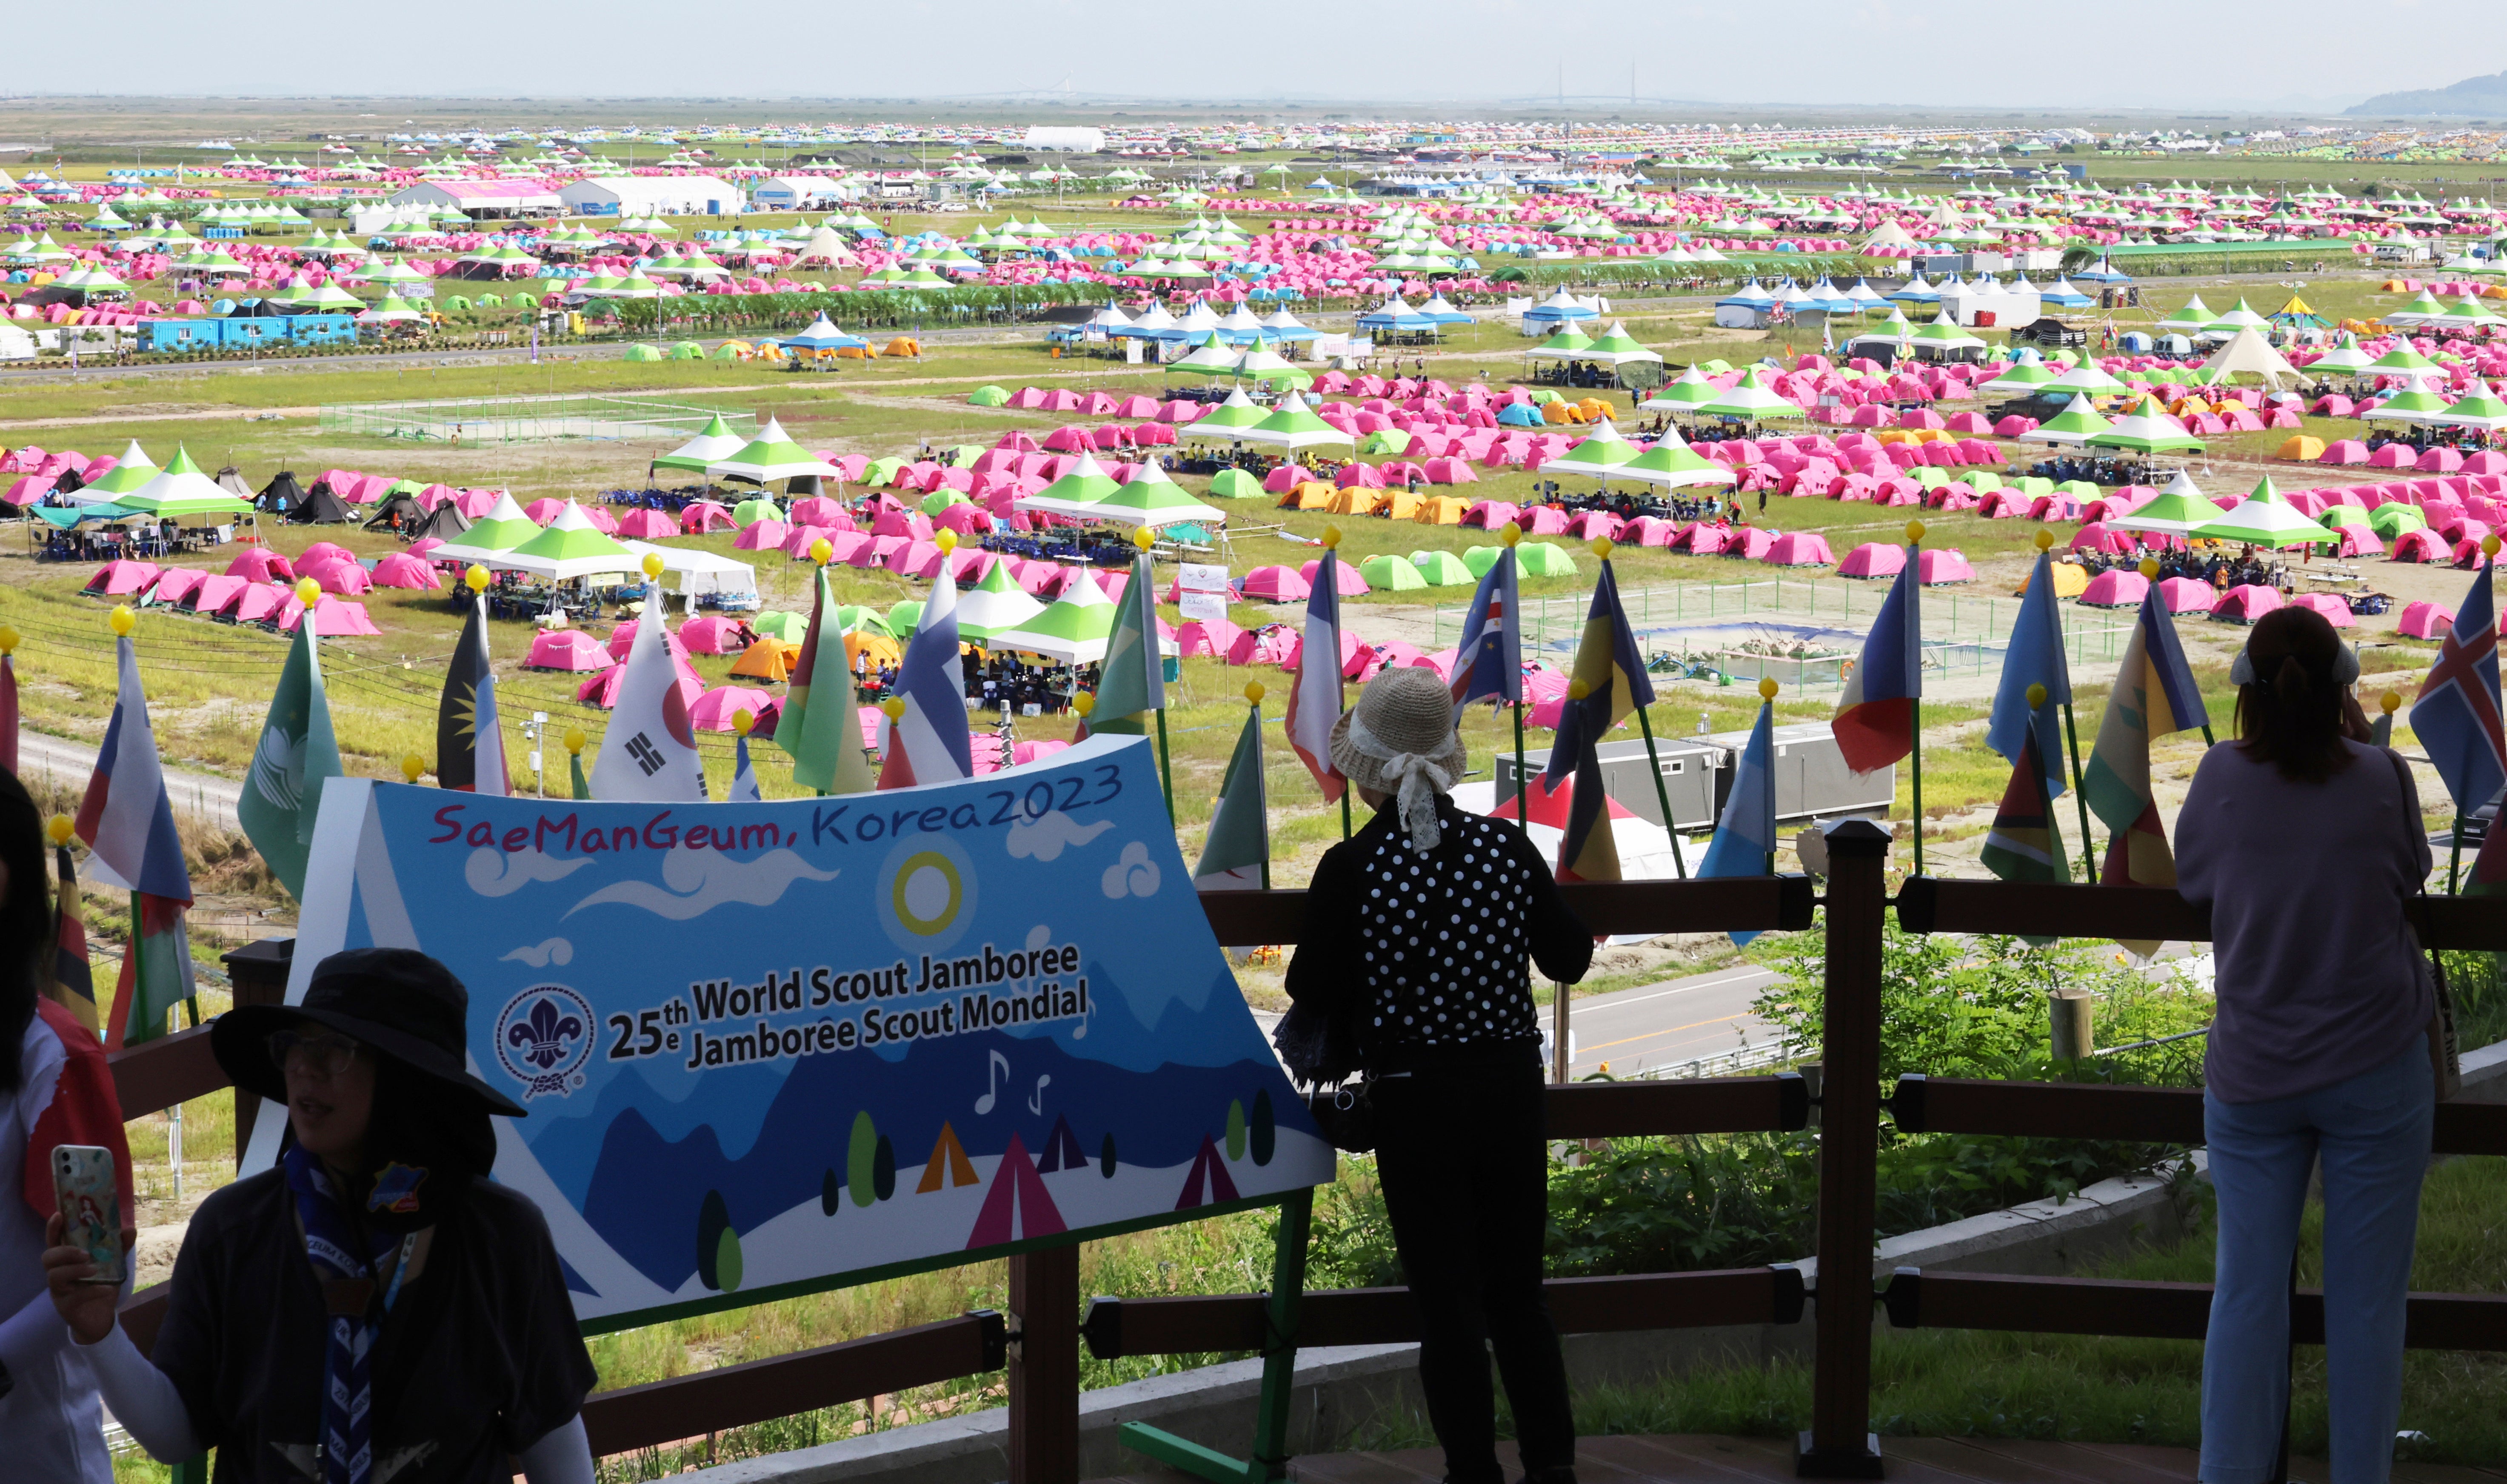 More than 40,000 people, including scouts from 155 nations attended the event